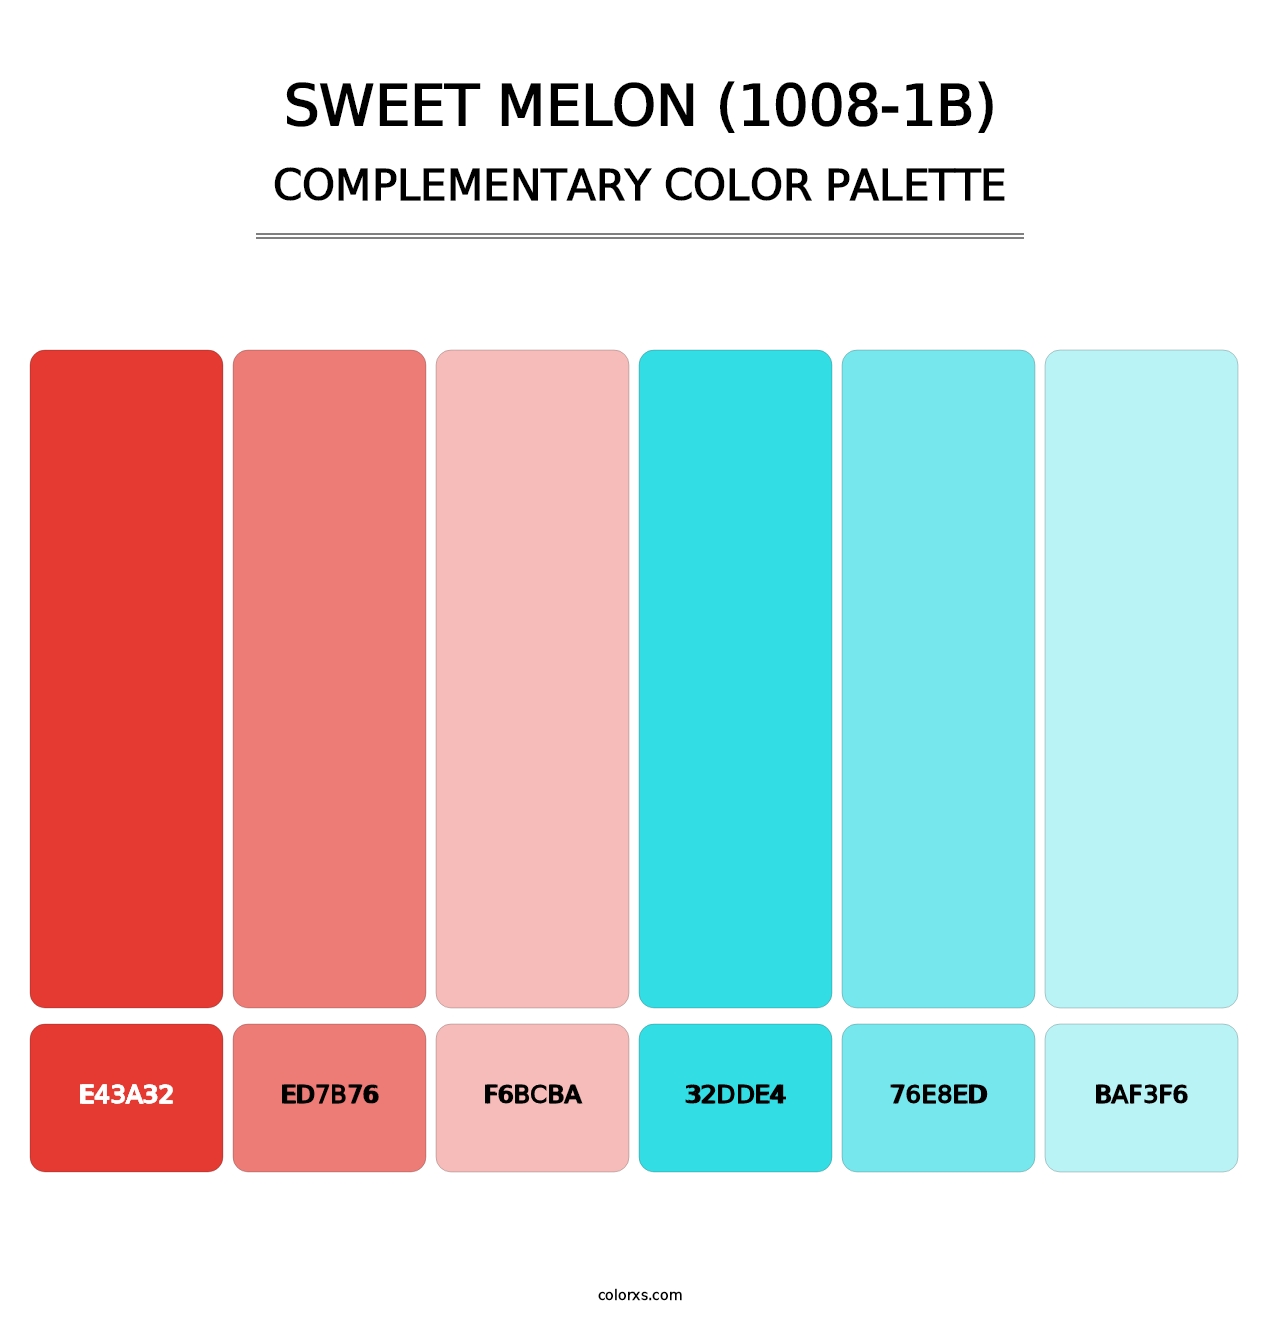 Sweet Melon (1008-1B) - Complementary Color Palette